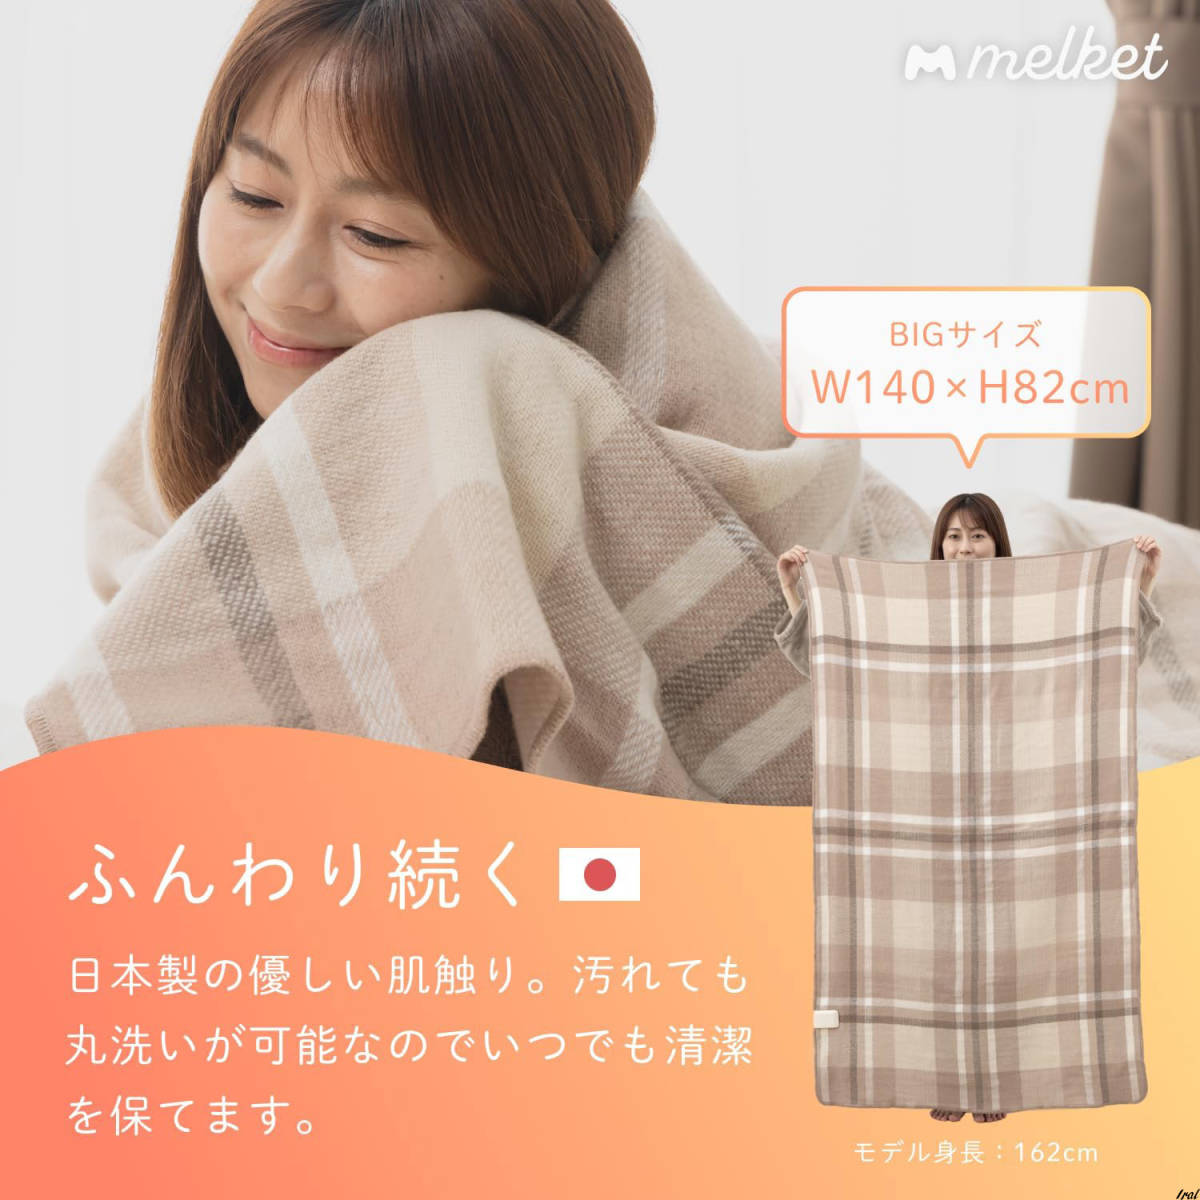  electric blanket large size 140×82cm made in Japan electric lap blanket .. bed combined use energy conservation circle wash less -step temperature adjustment mites ..